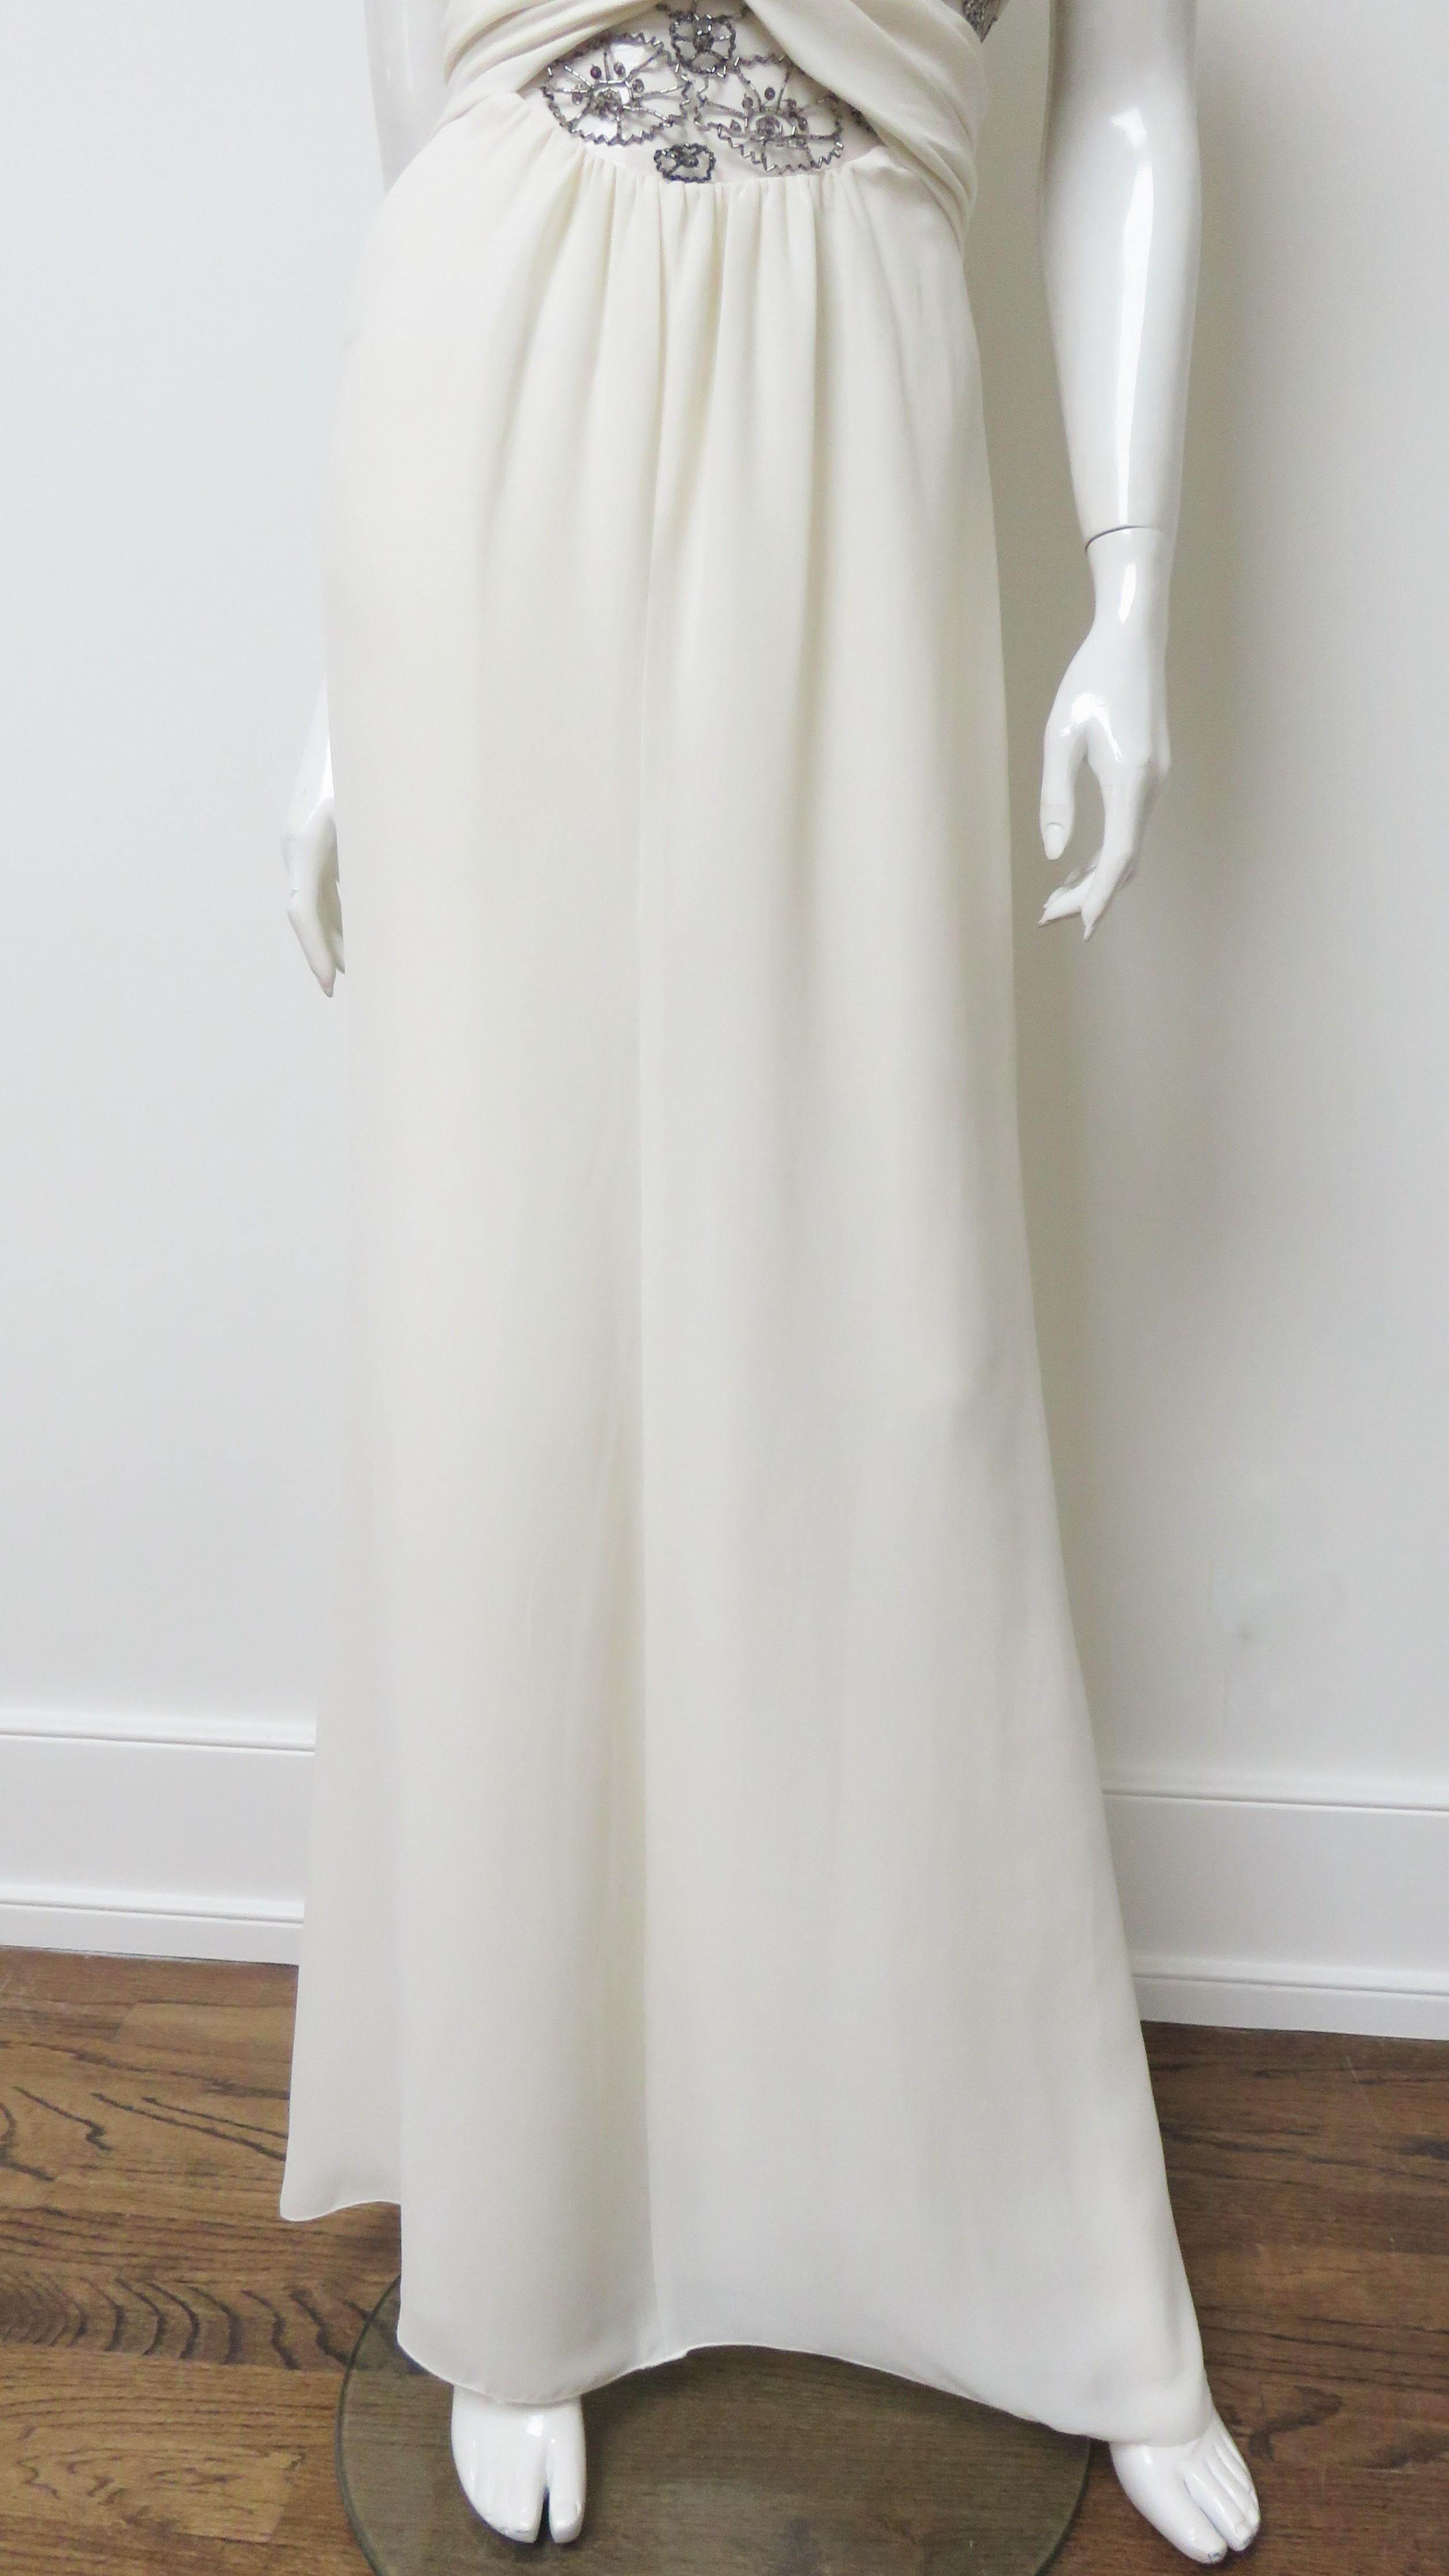 Valentino New Cut out Silk Gown  In Excellent Condition For Sale In Water Mill, NY